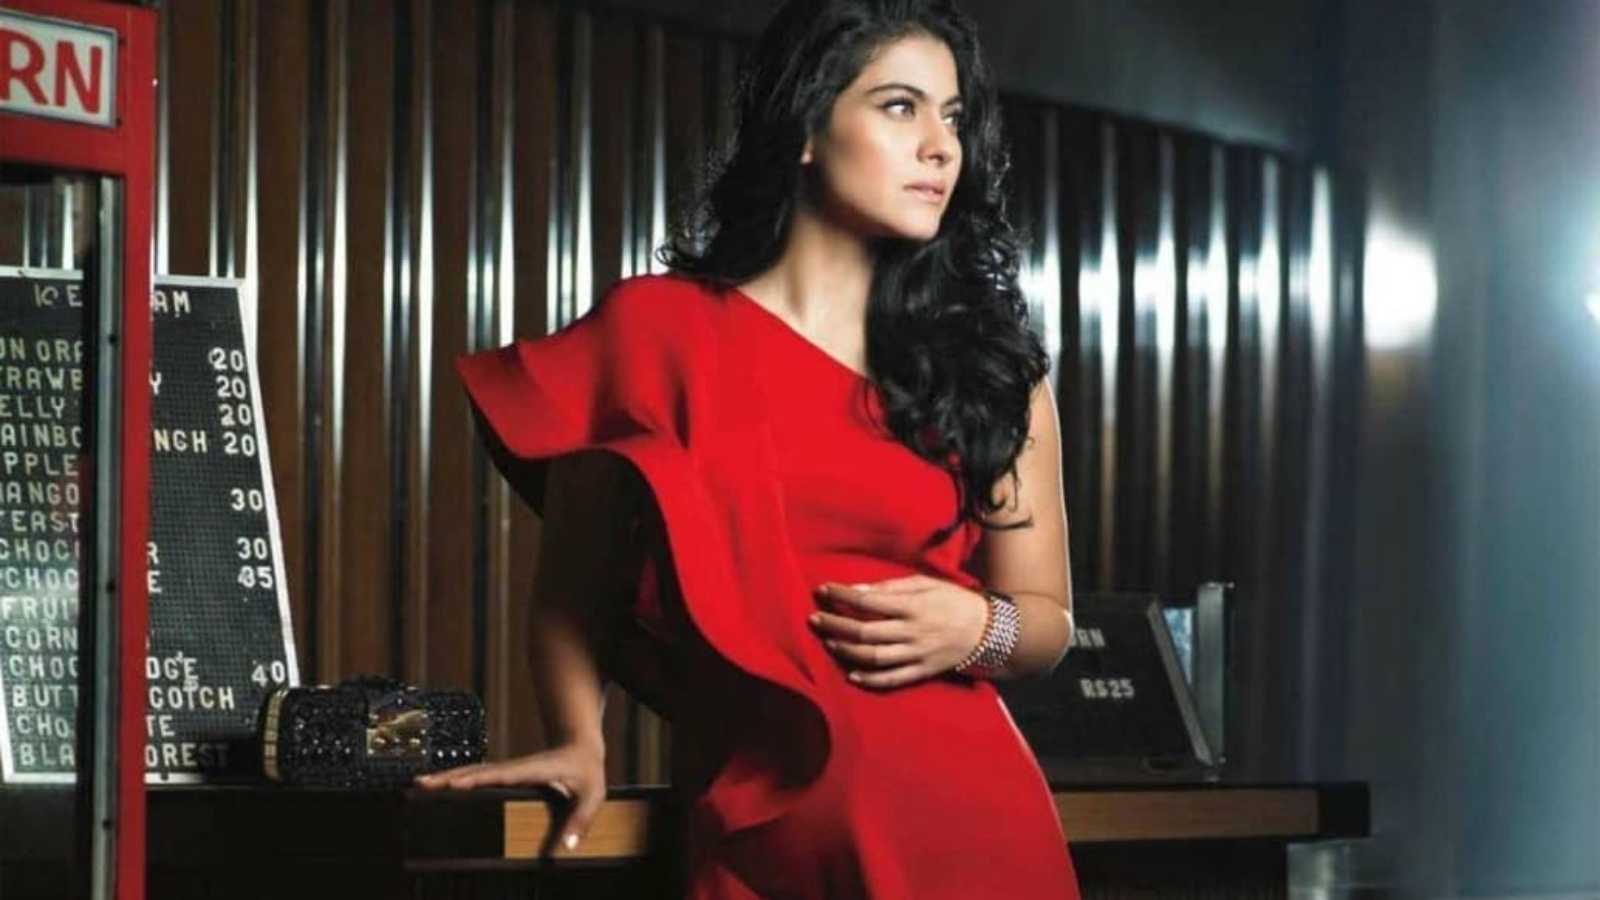 Kajol charging a film's worth of fee per episode of her debut web series; This is how many crores she's charging